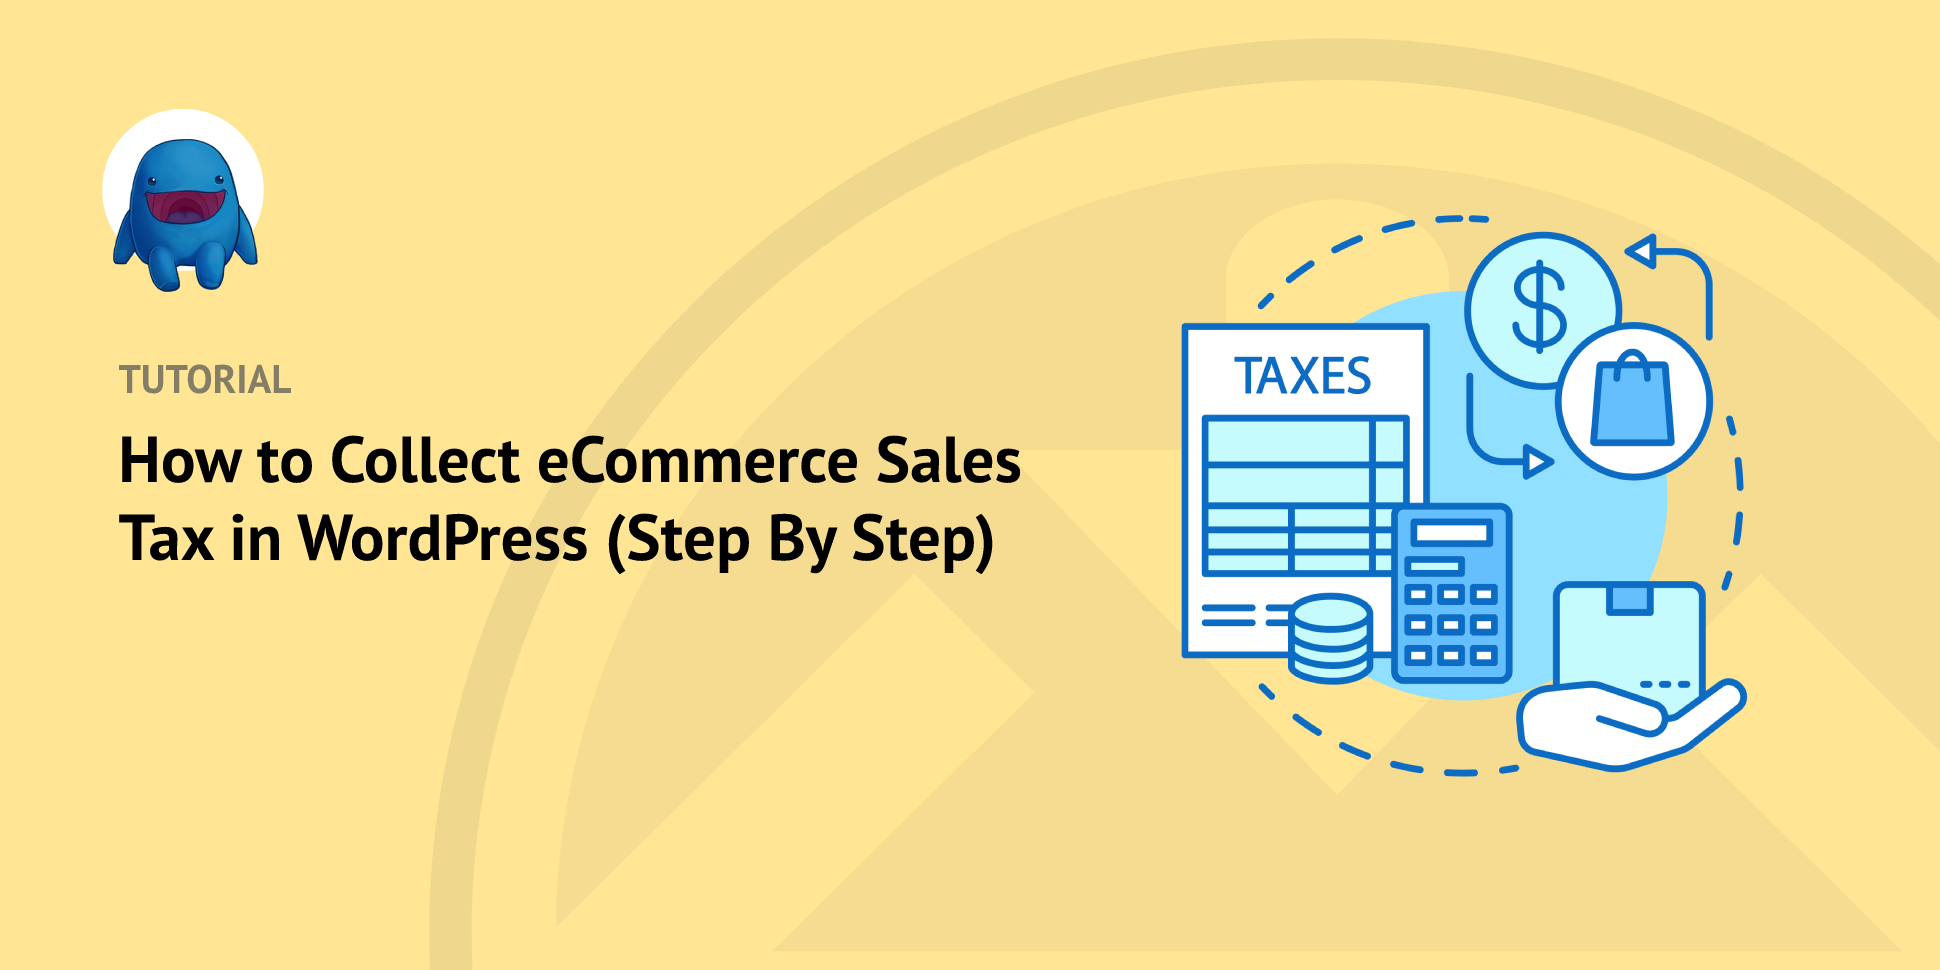 How to Collect eCommerce Sales Tax in WordPress